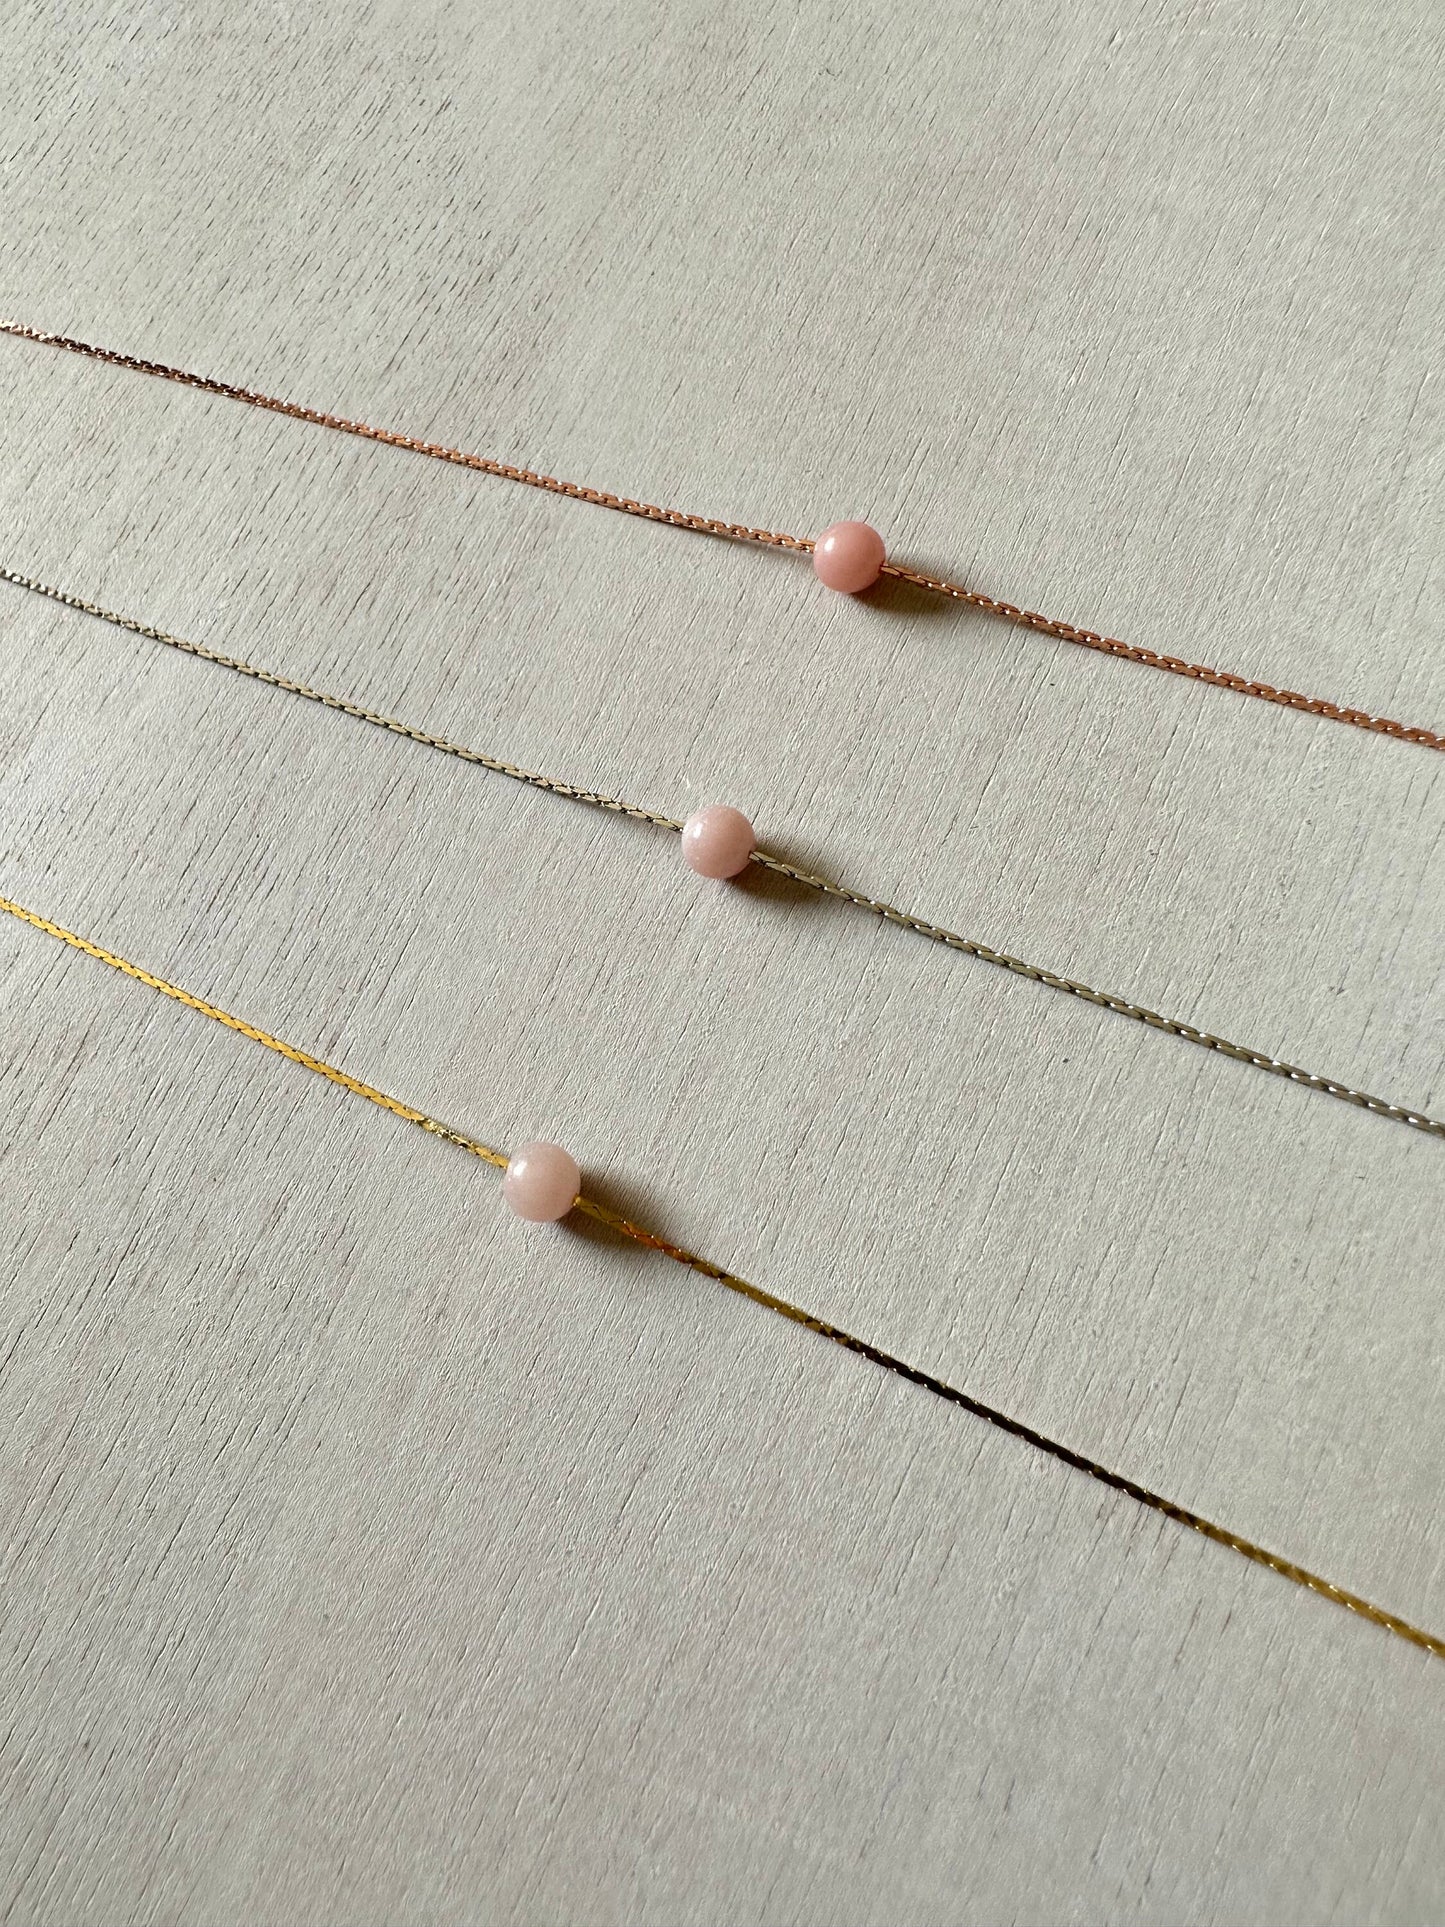 Pink Opal Necklace | Rose Gold | Gold | Silver | Dainty Necklace | Layering Necklace | Gemstone Necklace | Bead Necklace